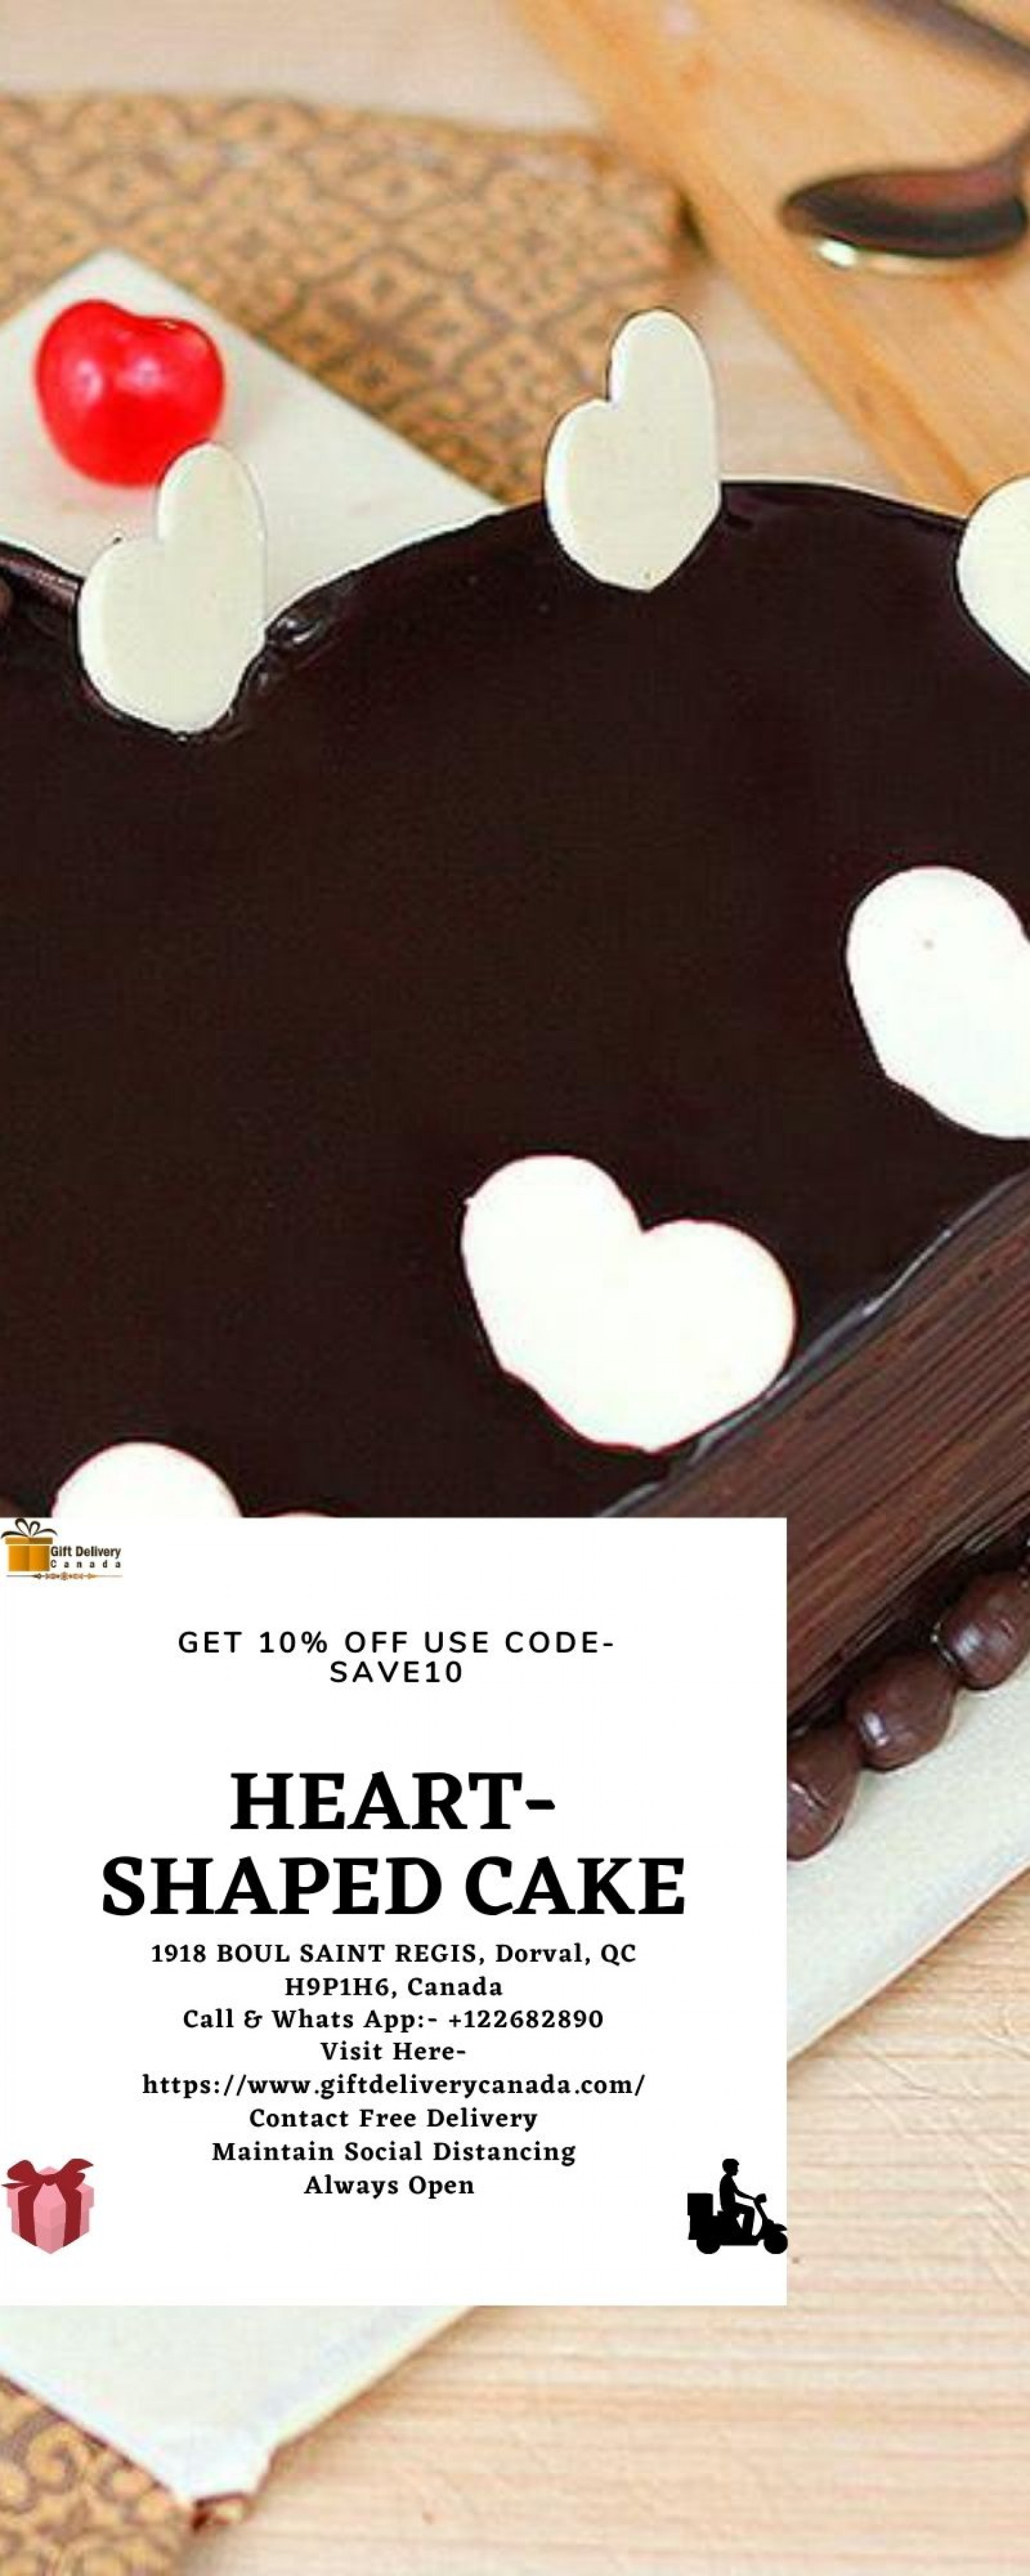 Buy Heart shape Chocolate Cake Delivery in Canada | Gift Delivery Canada Infographic